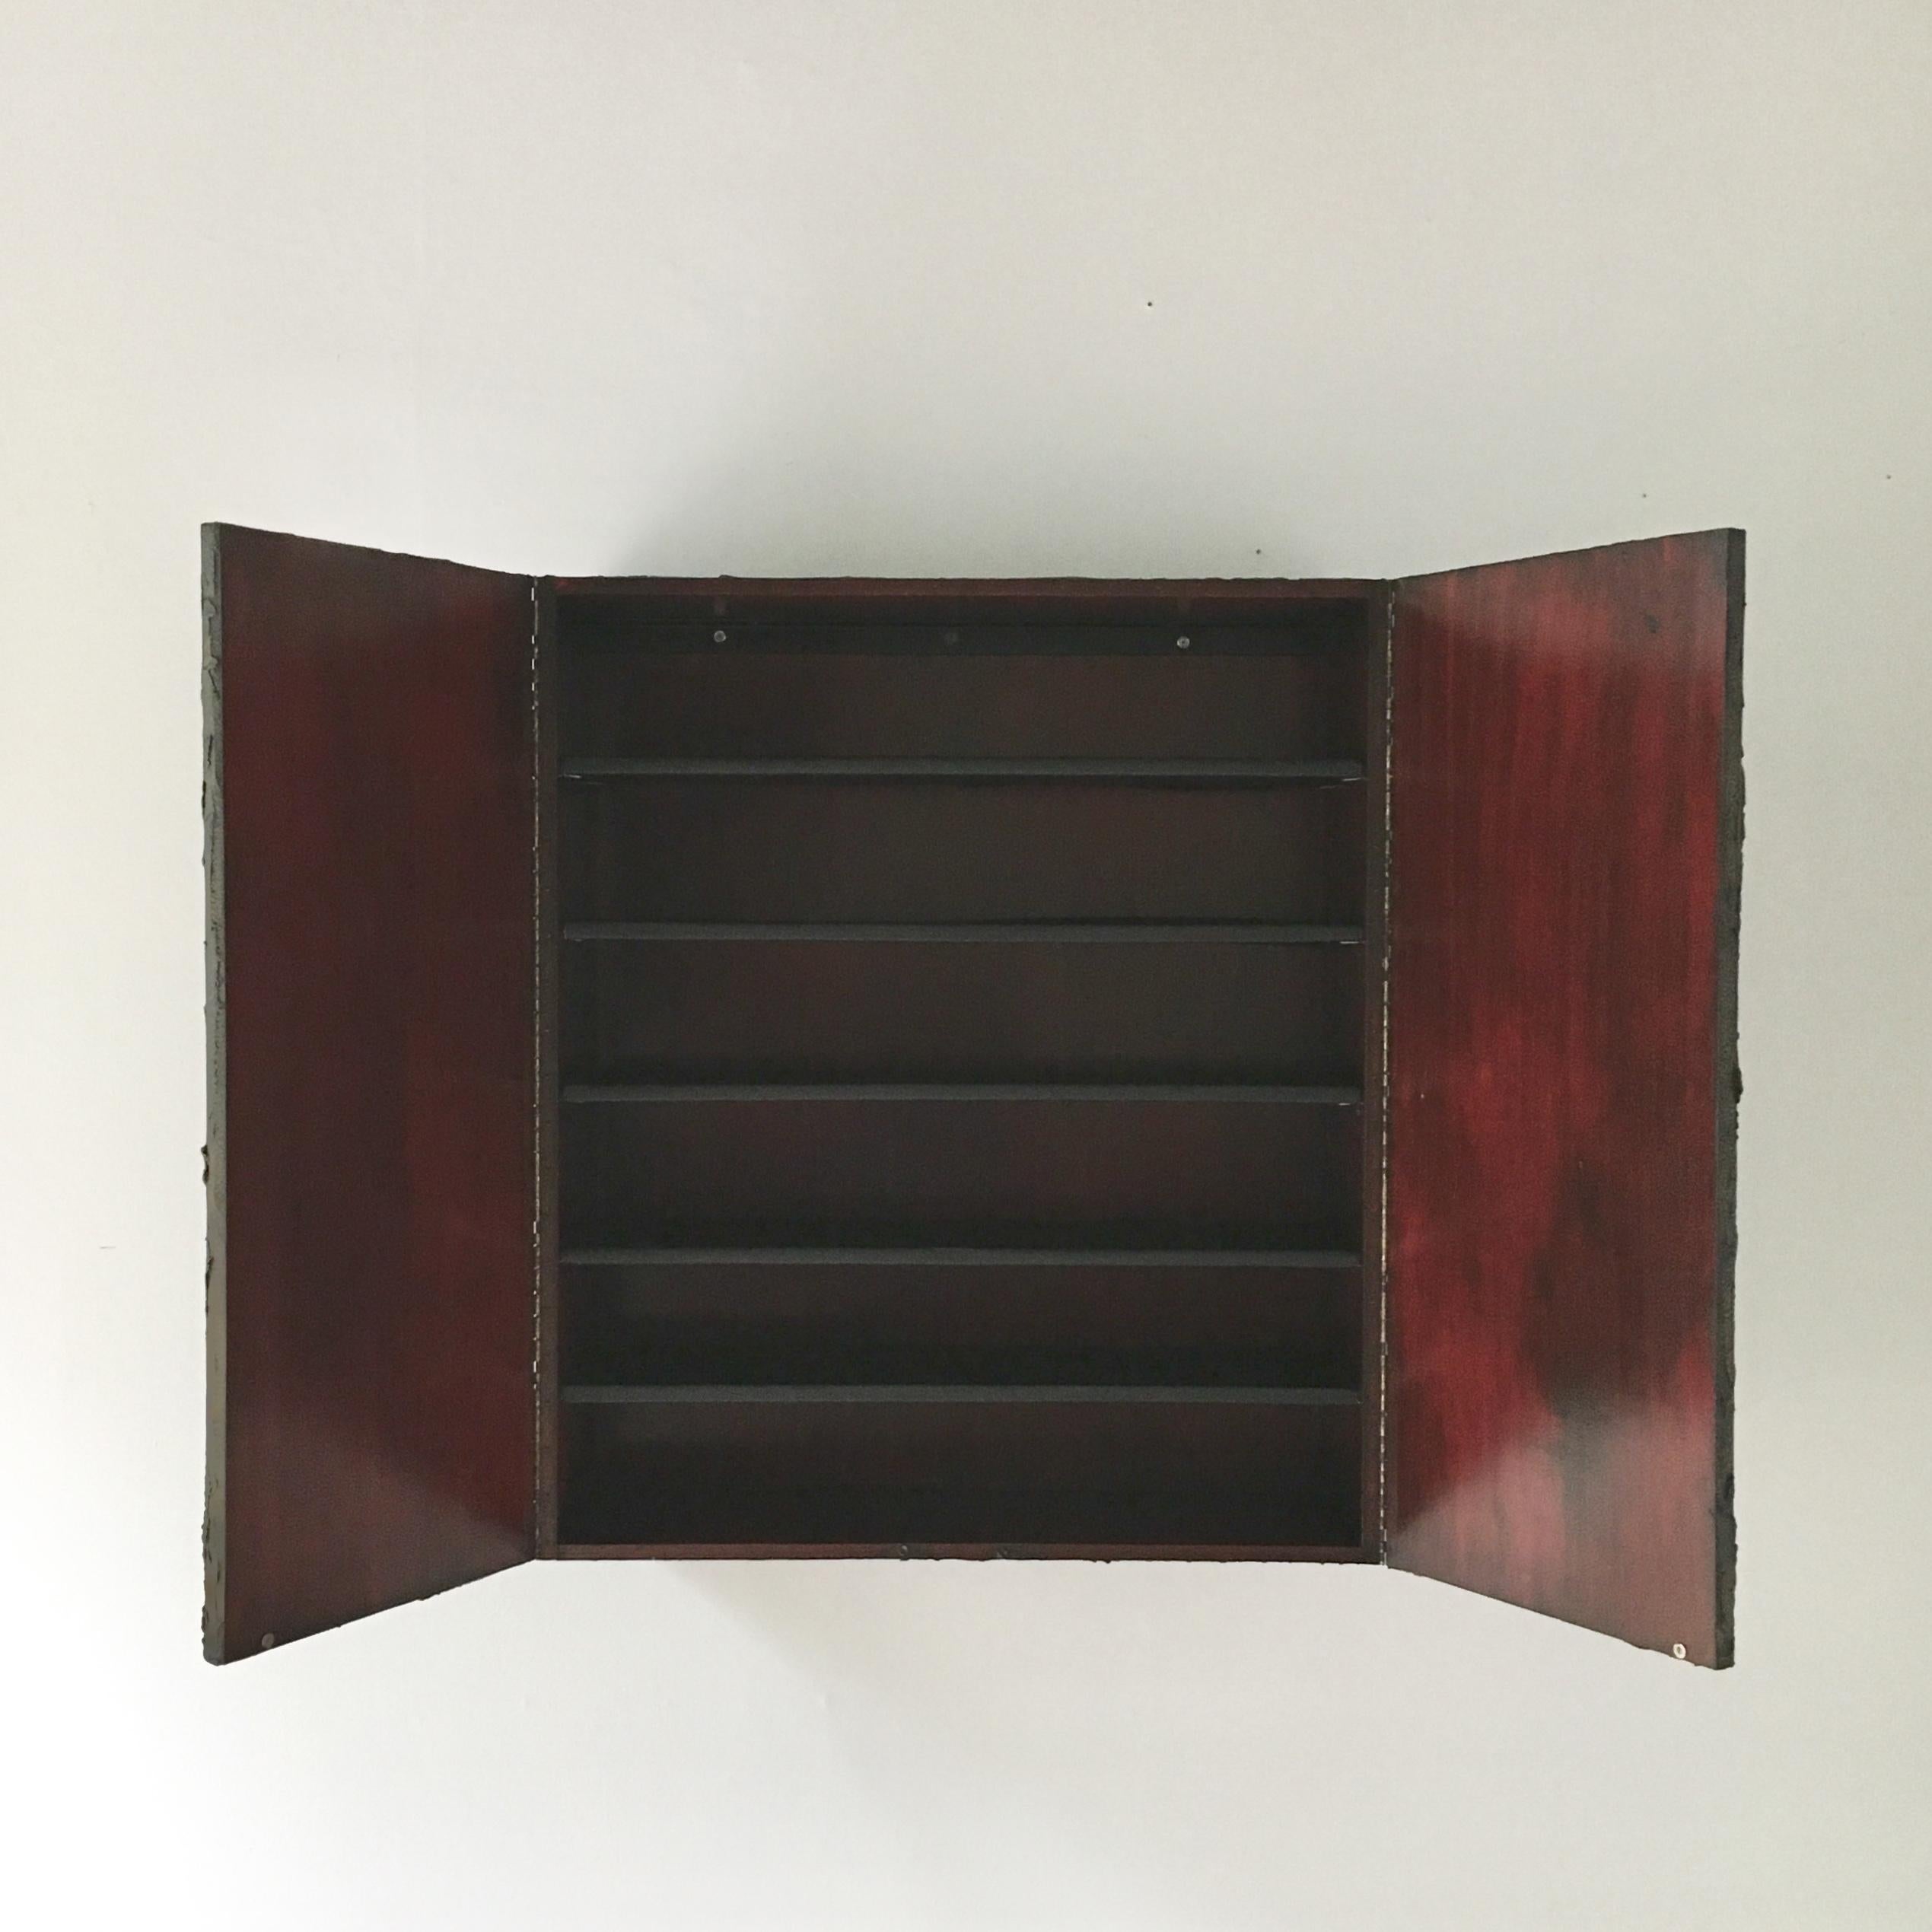 Bronzed Resin Paul Evans designed Wall Hung Cabinet, 1970 For Sale 5